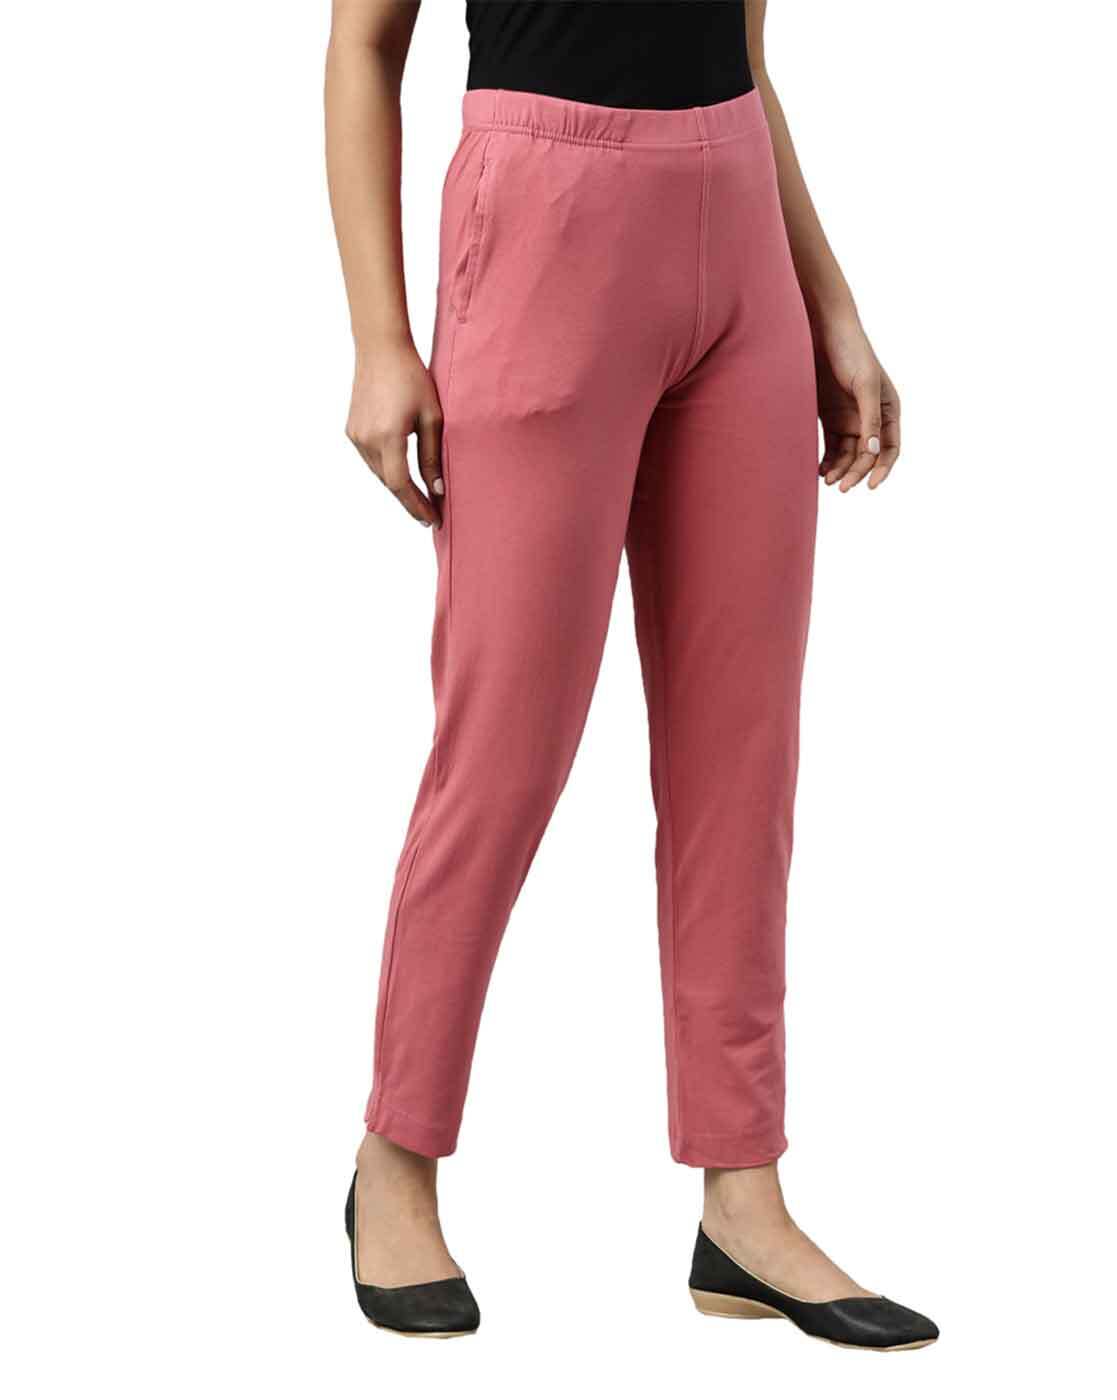 Buy GO COLORS Black Womens Solid Shiny Pants | Shoppers Stop